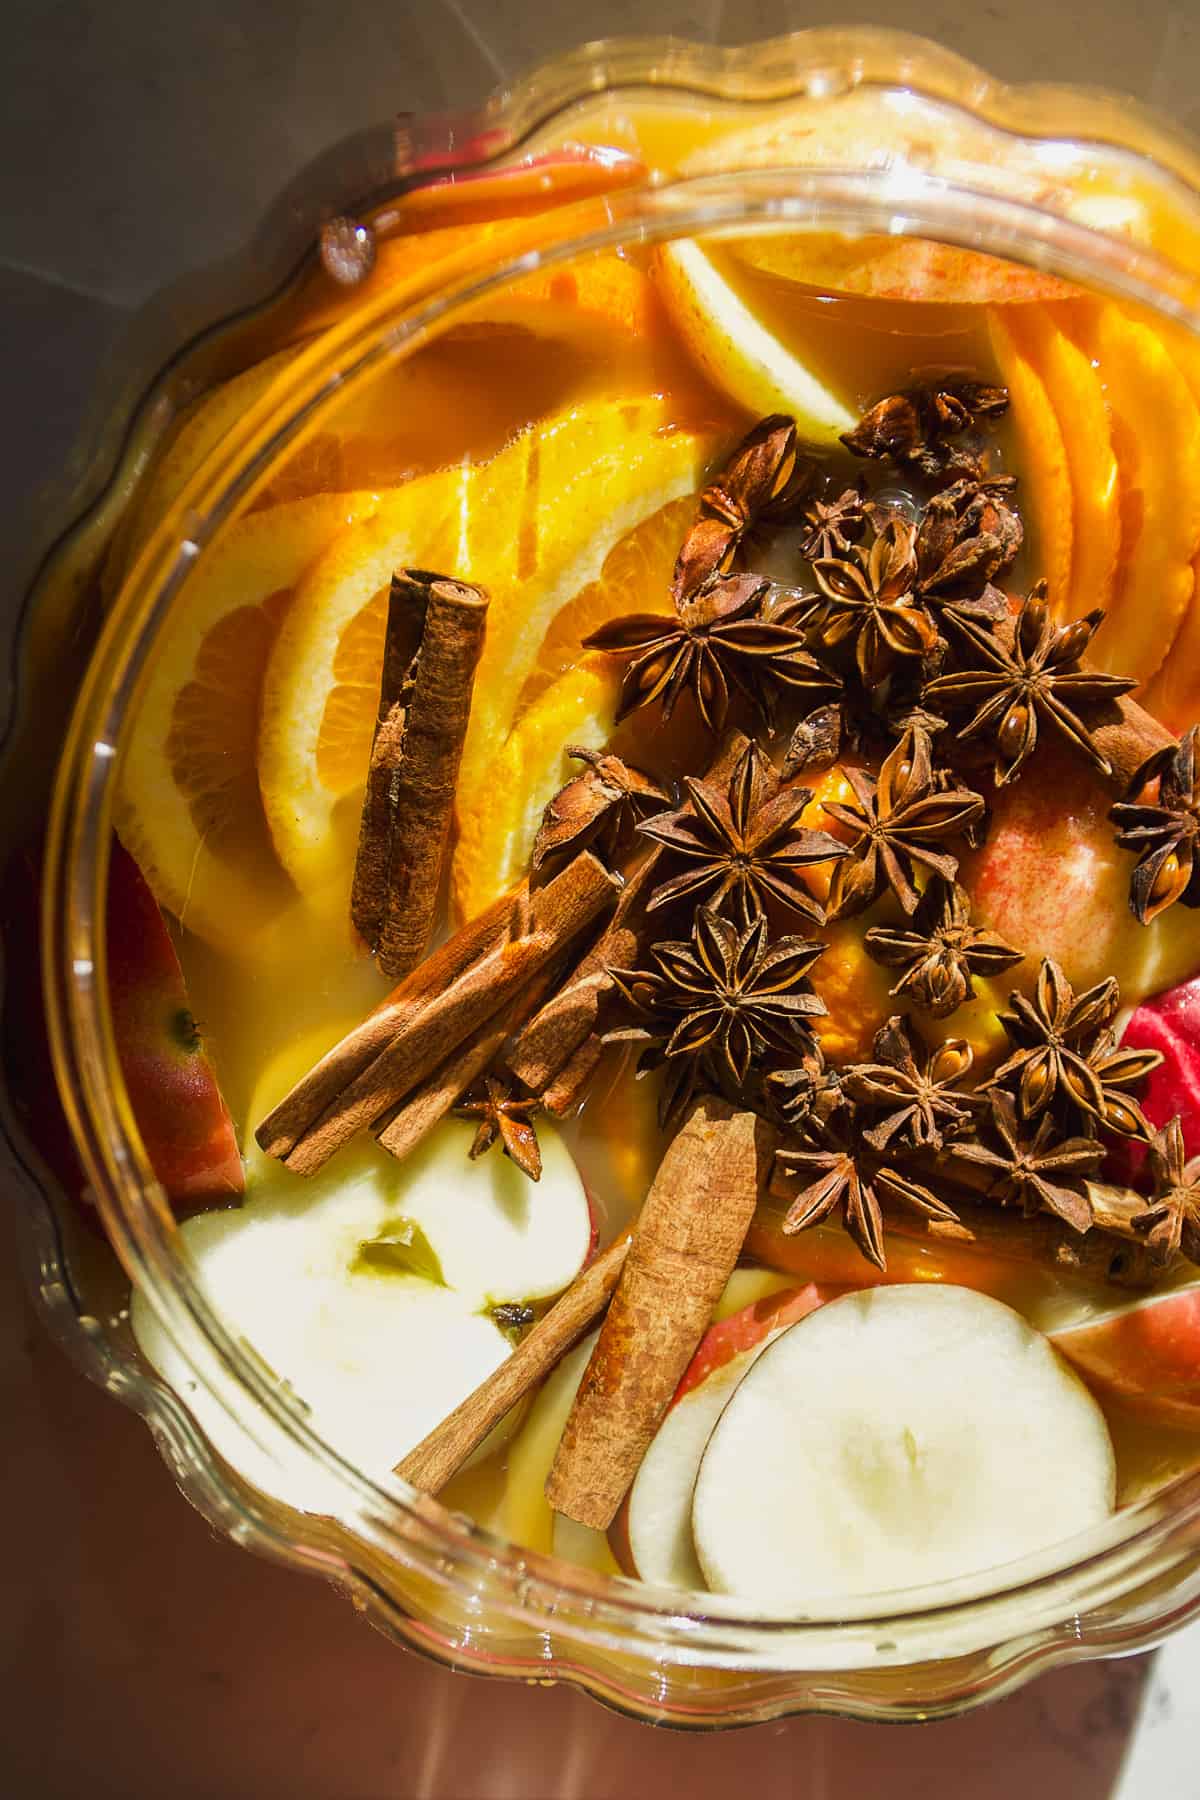 Overhead view of spiked apple cider punch with orange slices, apple slices, cinnamon sticks, and star anise.